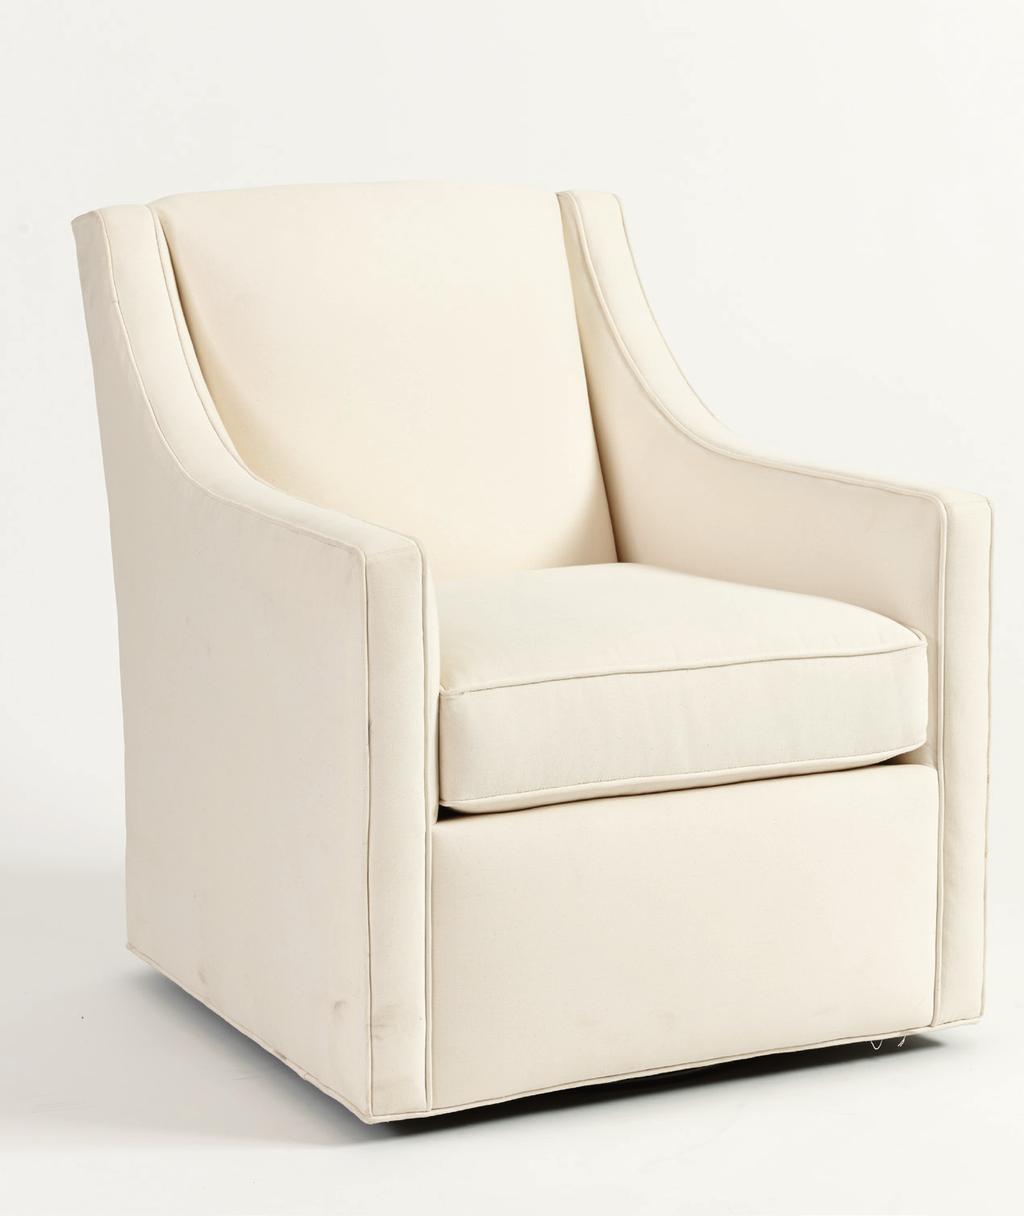 ABOUT THE CARLYLE SWIVEL CHAIR DIMENSIONS* SEE NOTE CARLYLE SWIVEL CHAIR (UC213) 36 H 20 D 24 1 /2 H Seat to